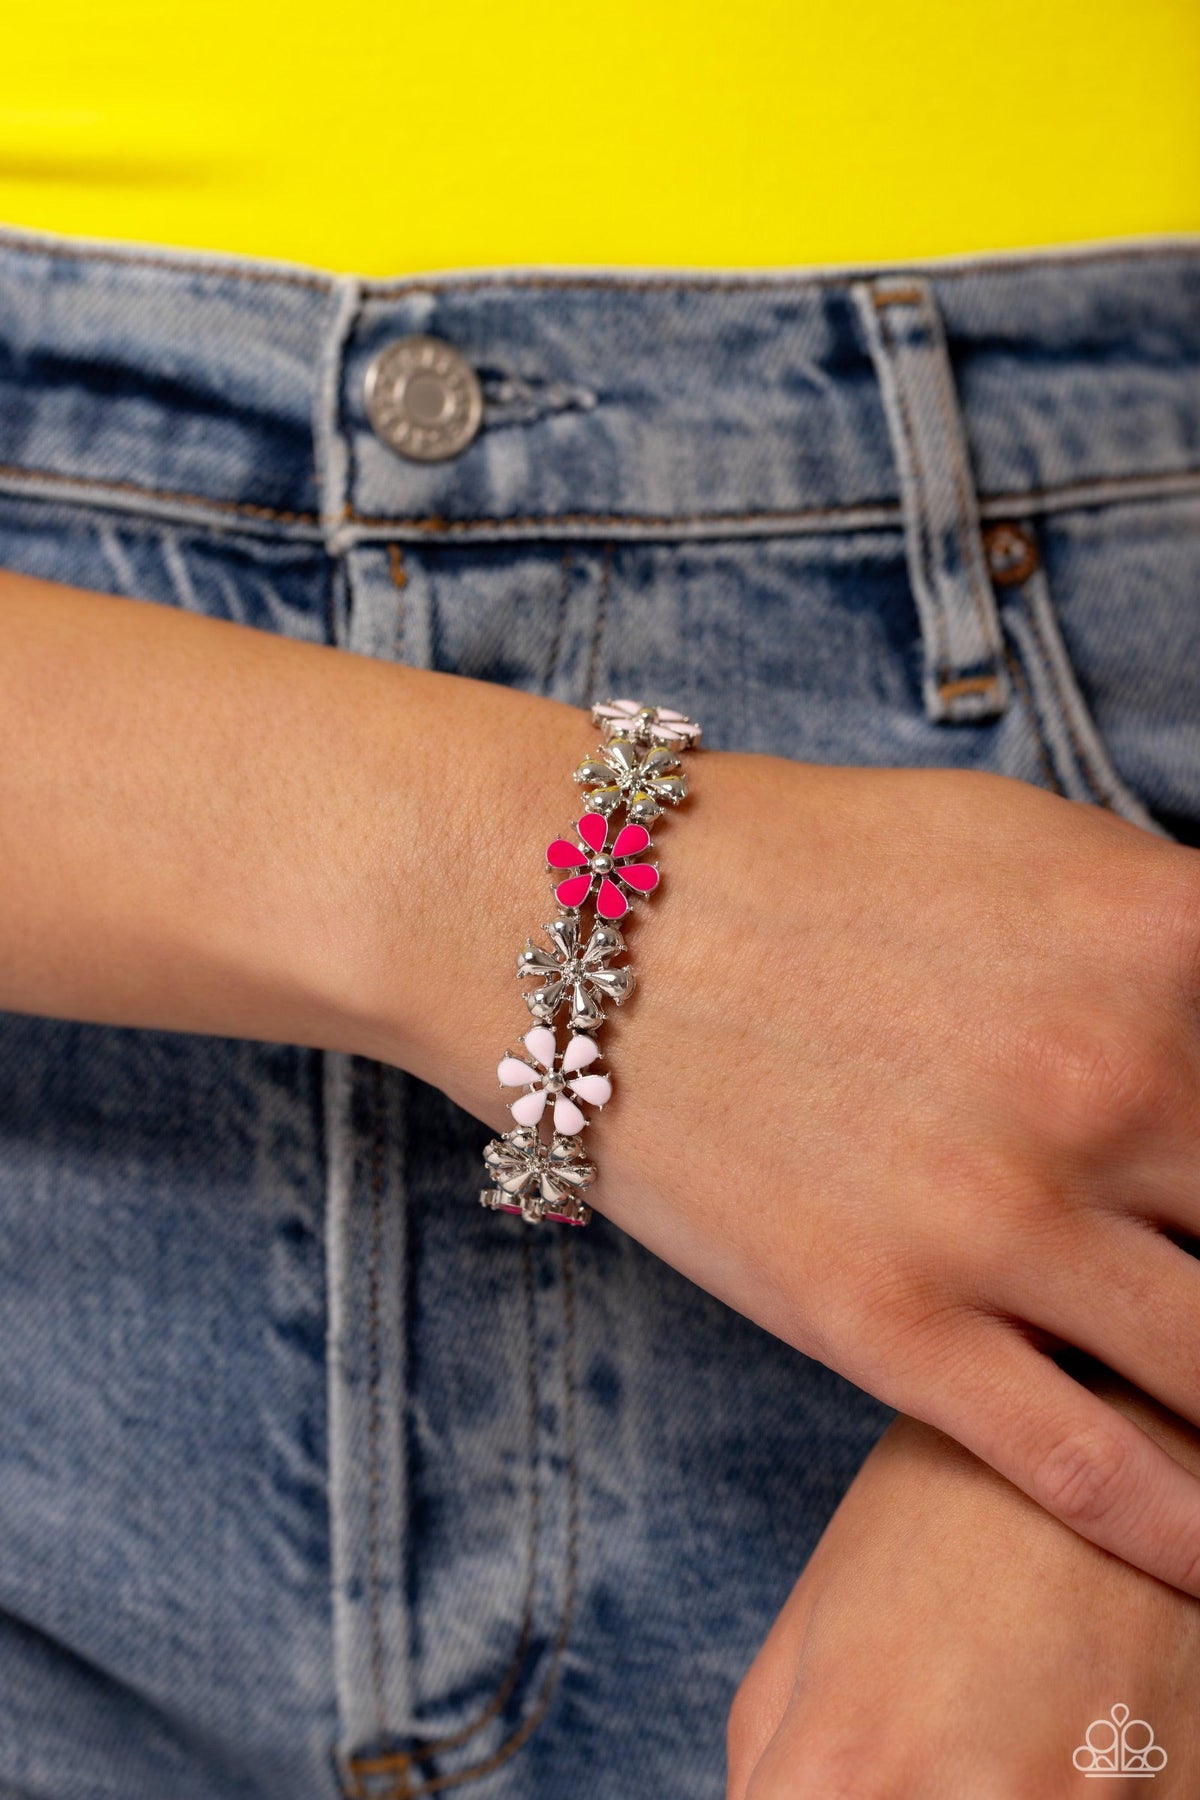 Floral Fair Pink Bracelet - Paparazzi Accessories-on model - CarasShop.com - $5 Jewelry by Cara Jewels